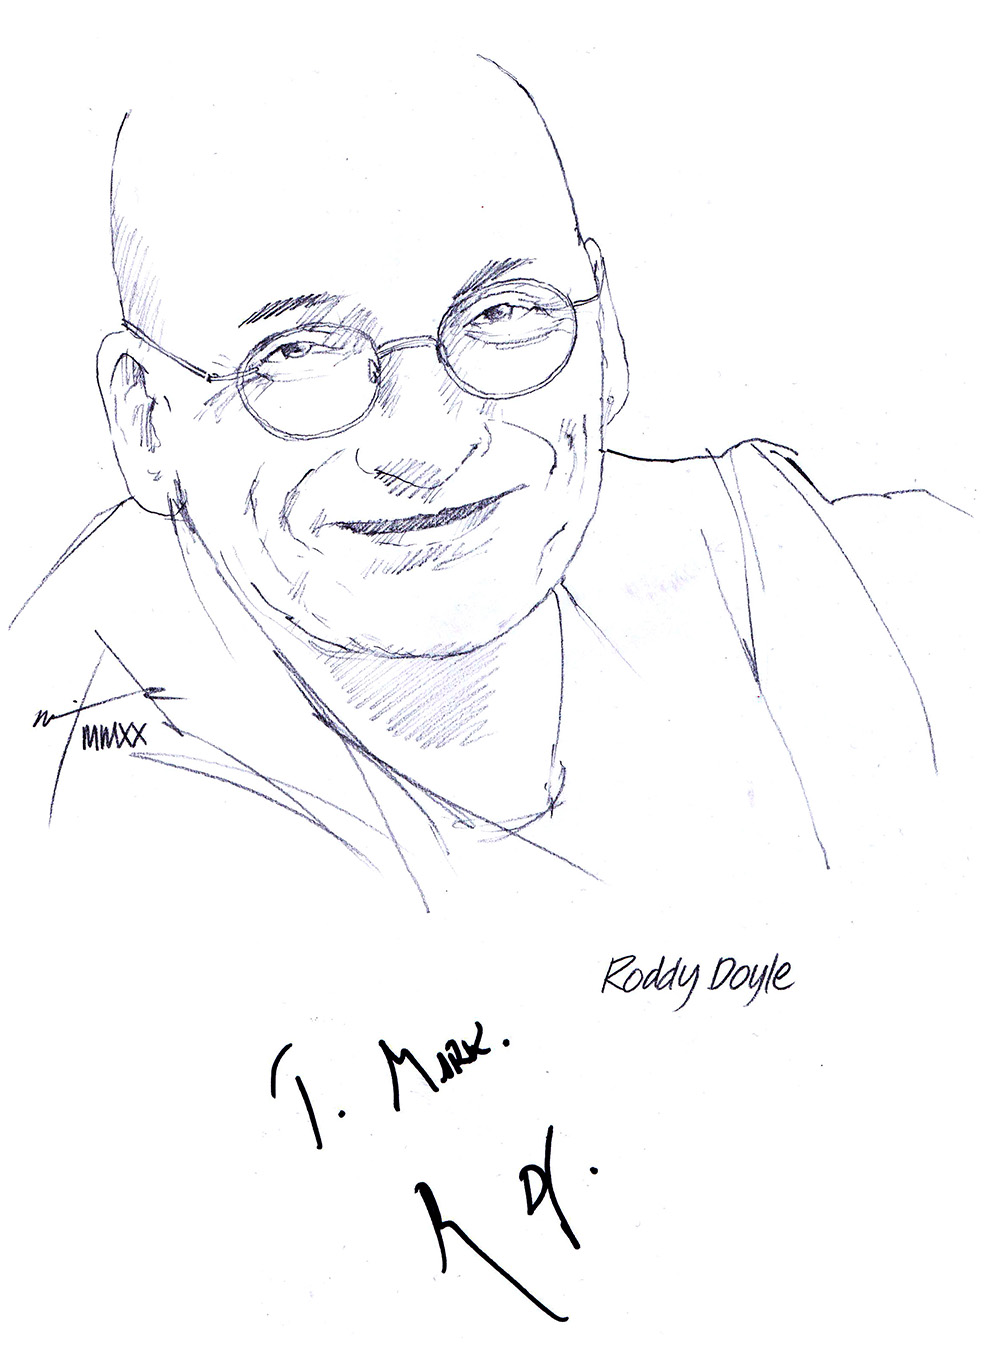 Autographed drawing of writer Roddy Doyle